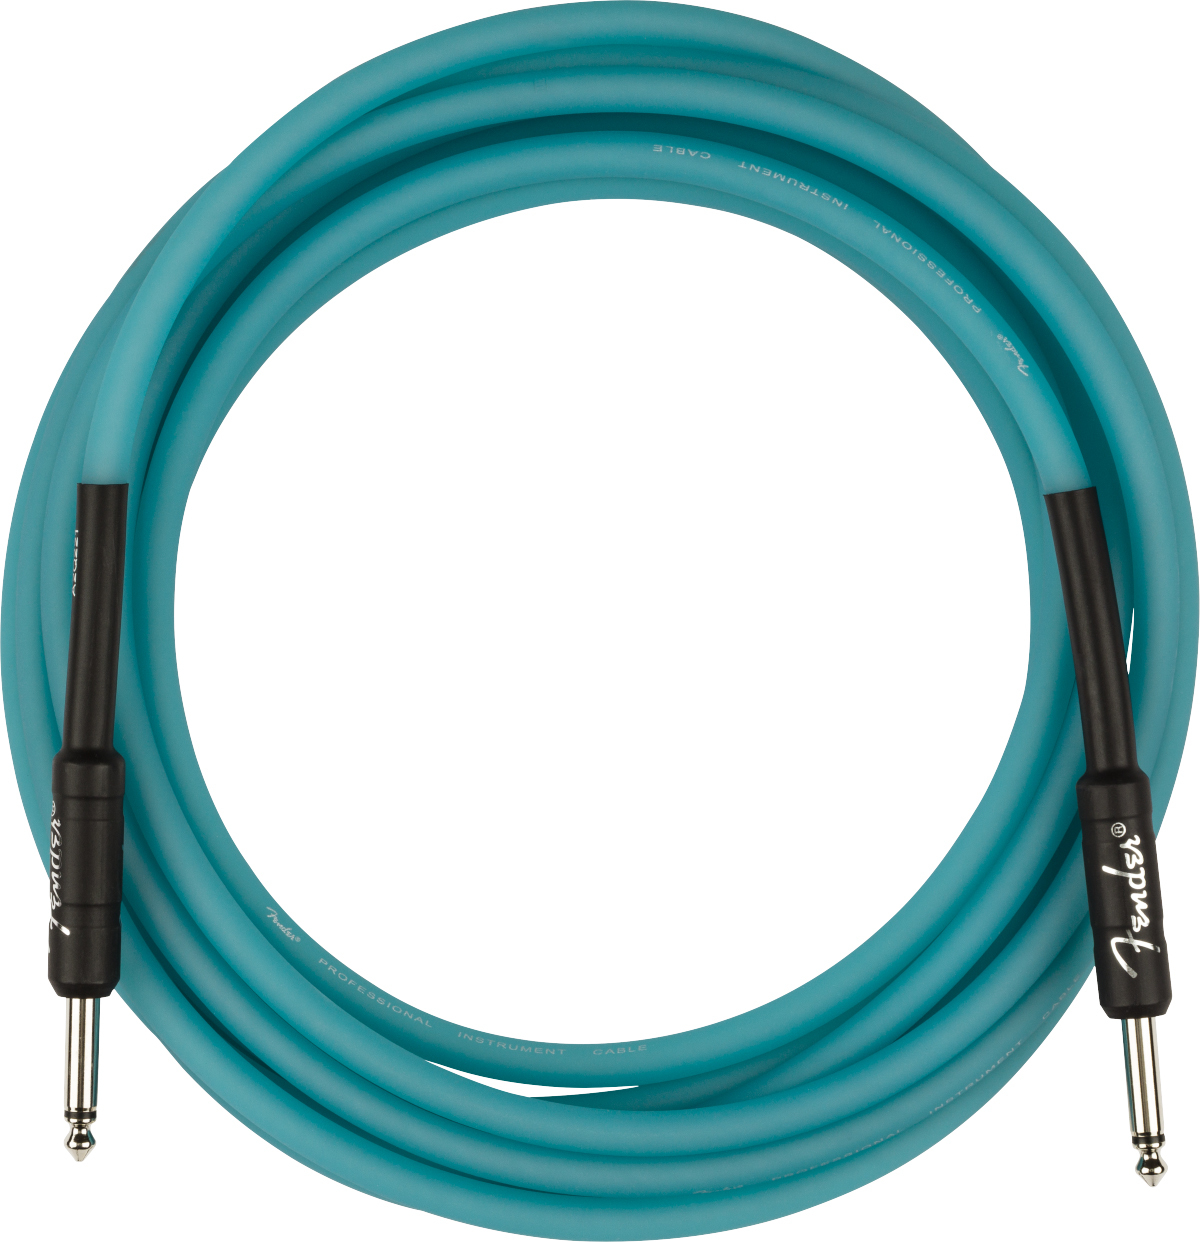 Fender Pro Glow In The Dark Instrument Cable Droit/droit 18.6ft Blue - Cable - Main picture